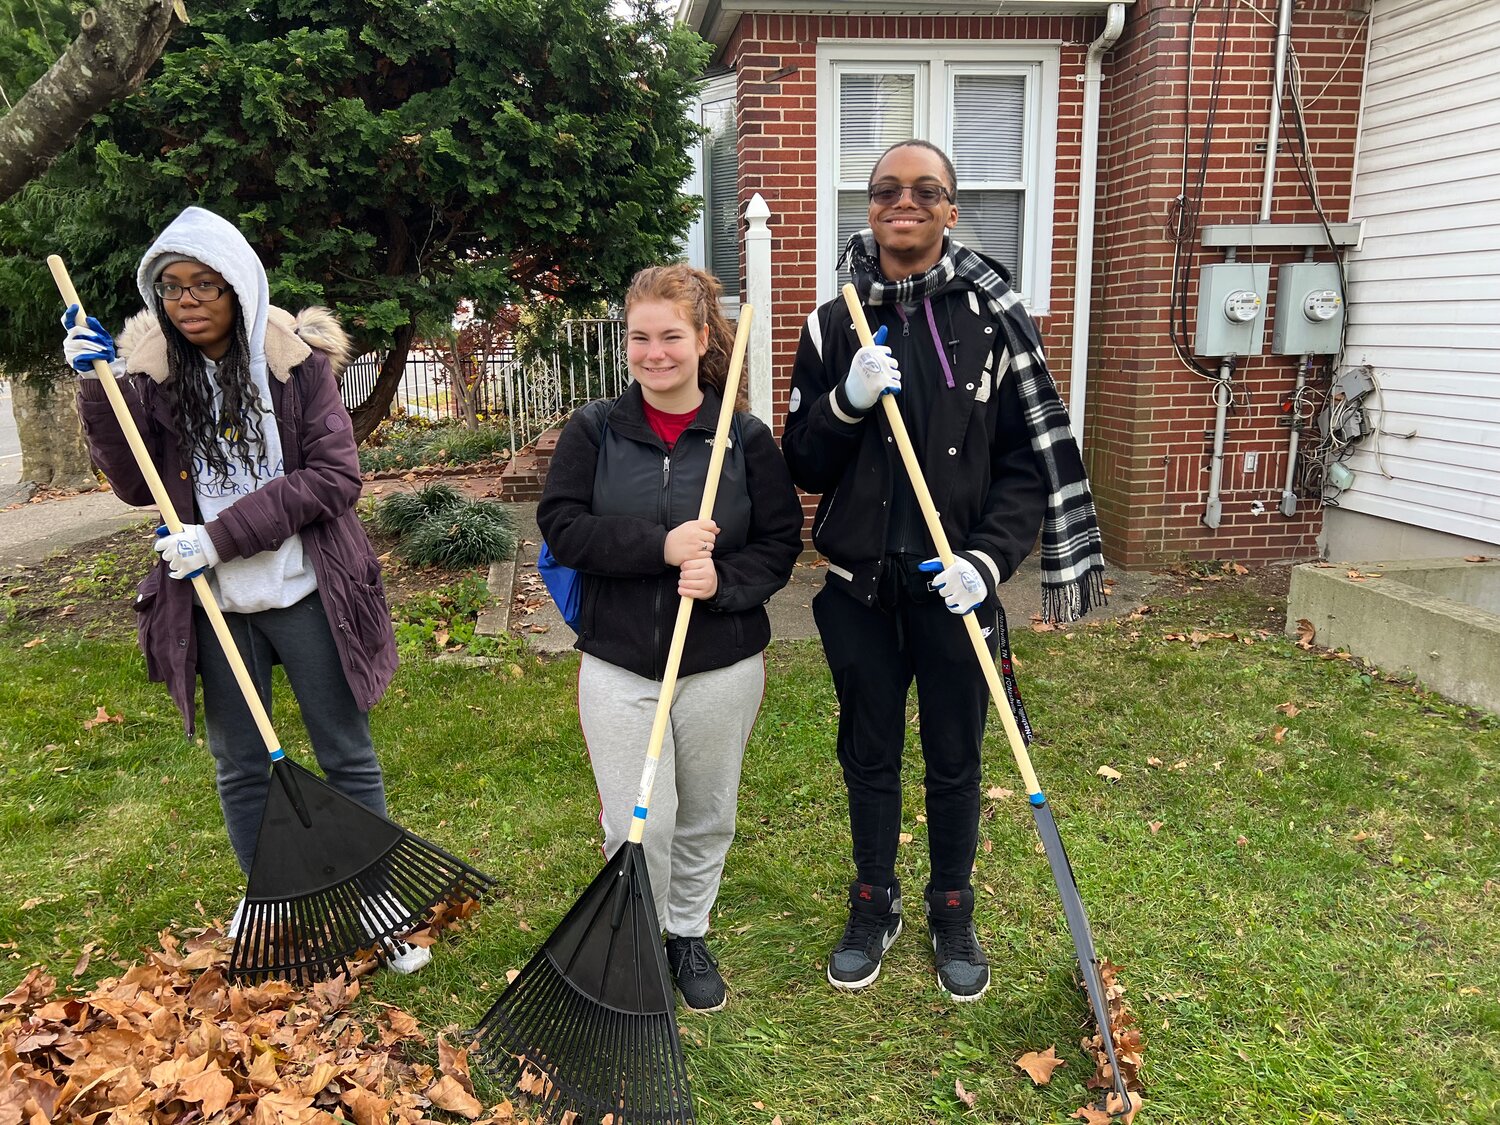 Three Hofstra students with three different majors all joined Shake-A-Rake to “give back to the community.” From left, criminology major Noemie Desruisseaux, 19, graduate family and consumer science major Caitlin Brophy, 22, and philosophy, rhetoric, and public advocacy major Maximillien A. Raymond, 20, pitched in with about 20 other students at the John J. Byrne Community Center.